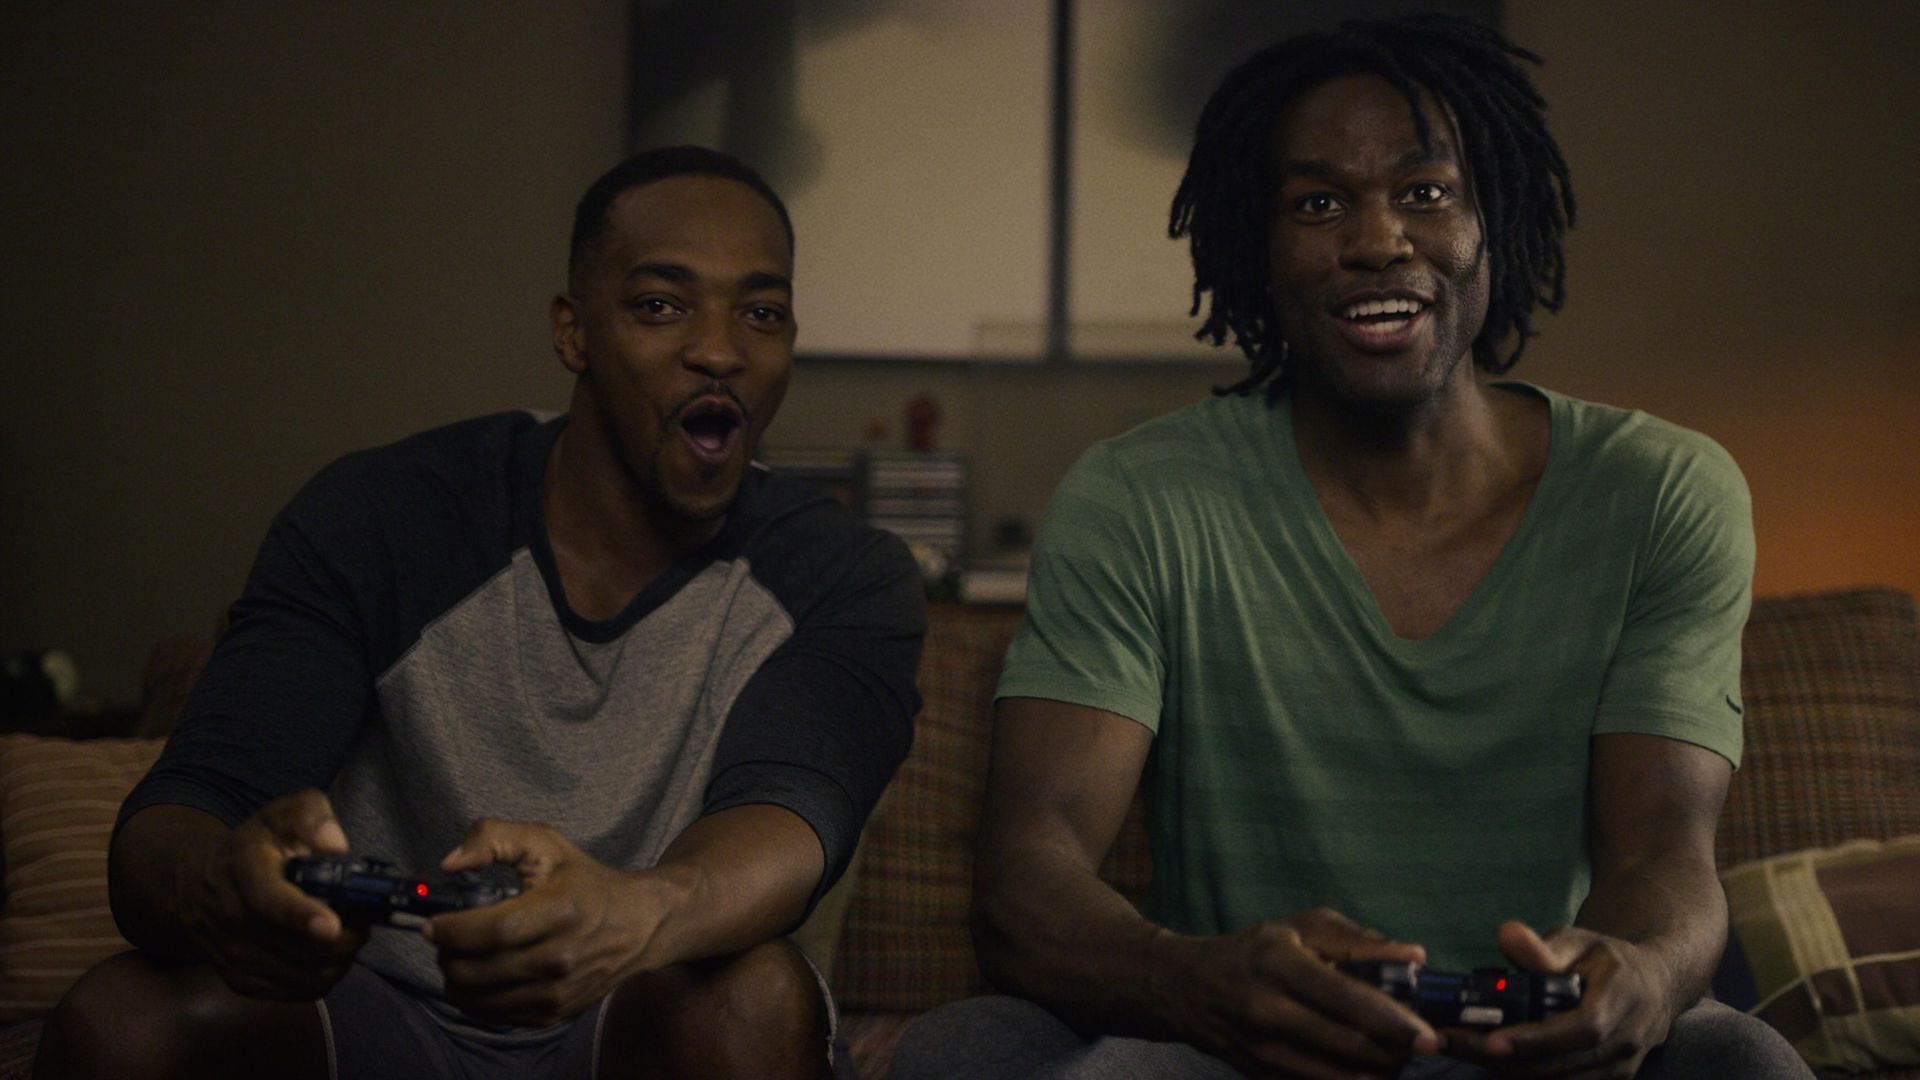 Anthony Mackie and Yahya Abdul-Mateen II in a still from Black Mirror (Image via IMDb)